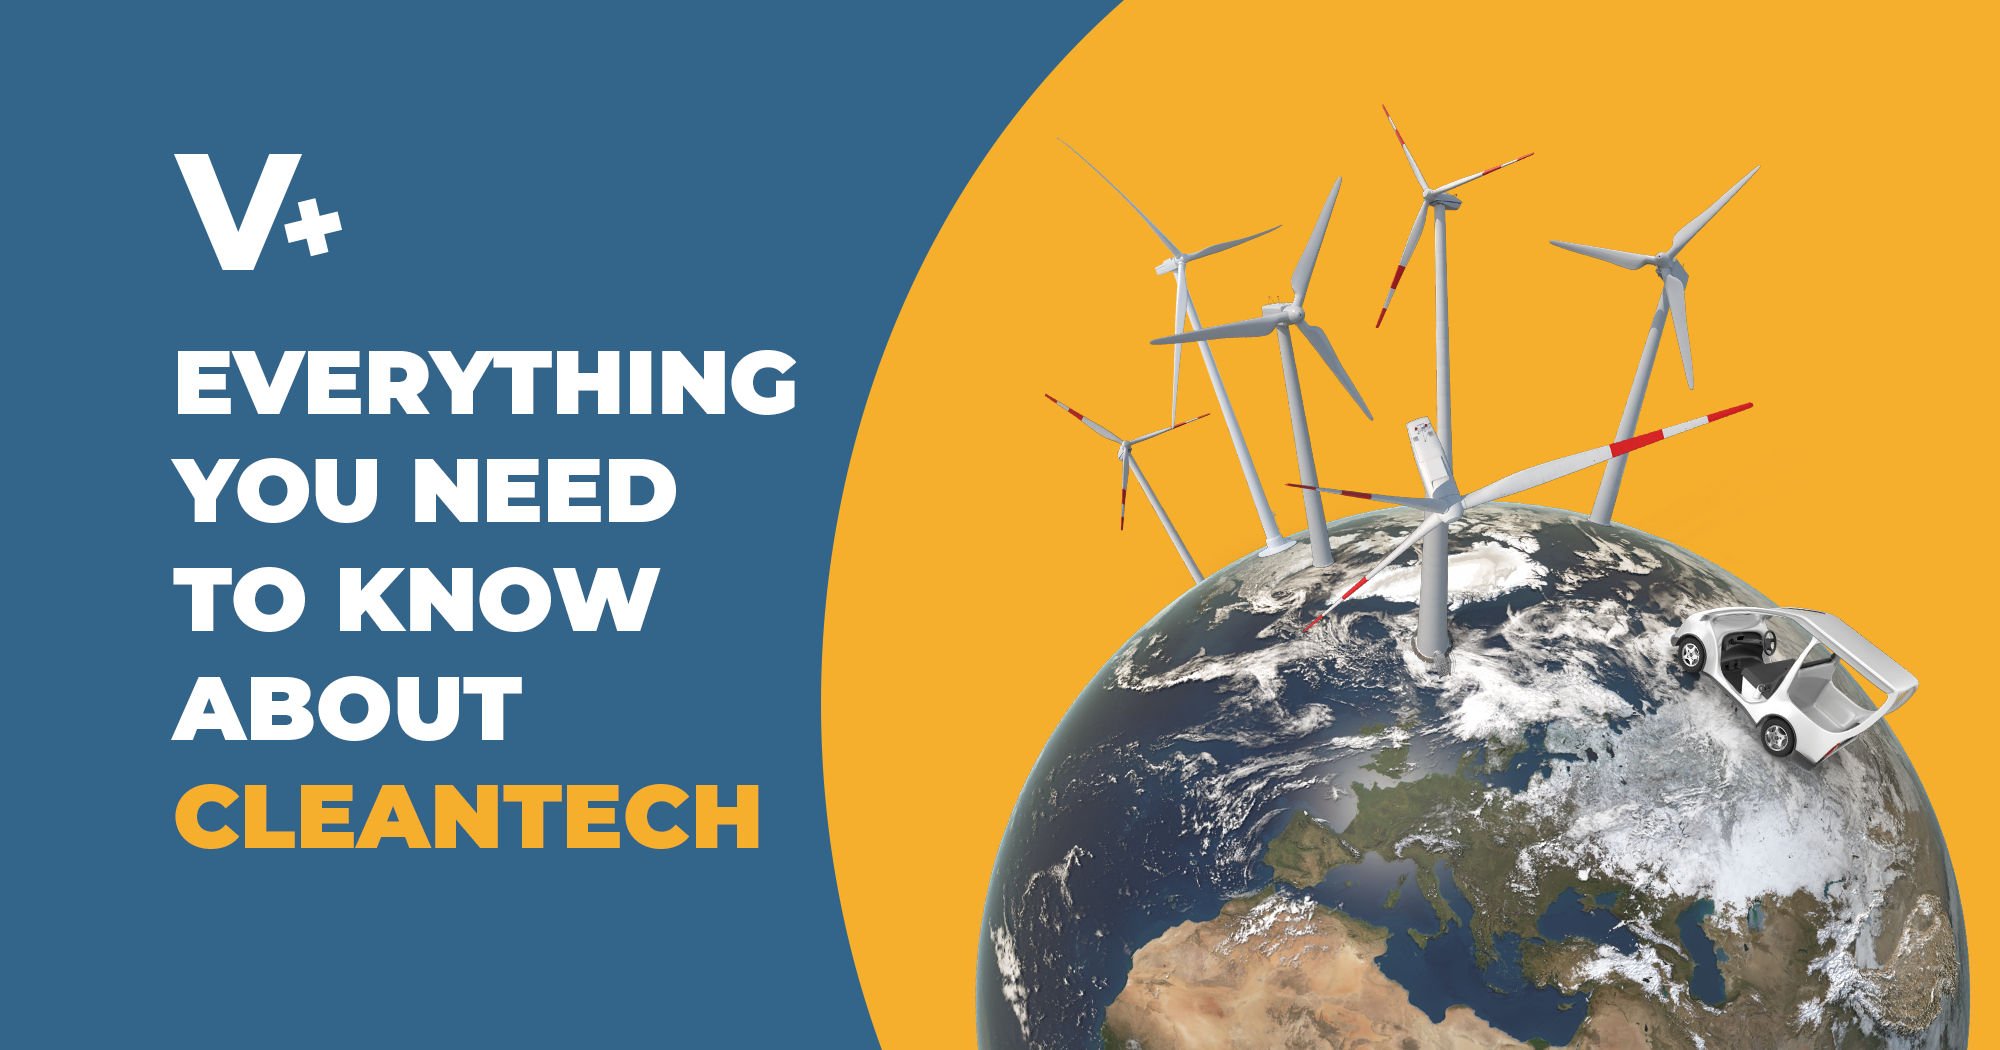 Cleantech: Examples, Companies, and Trends